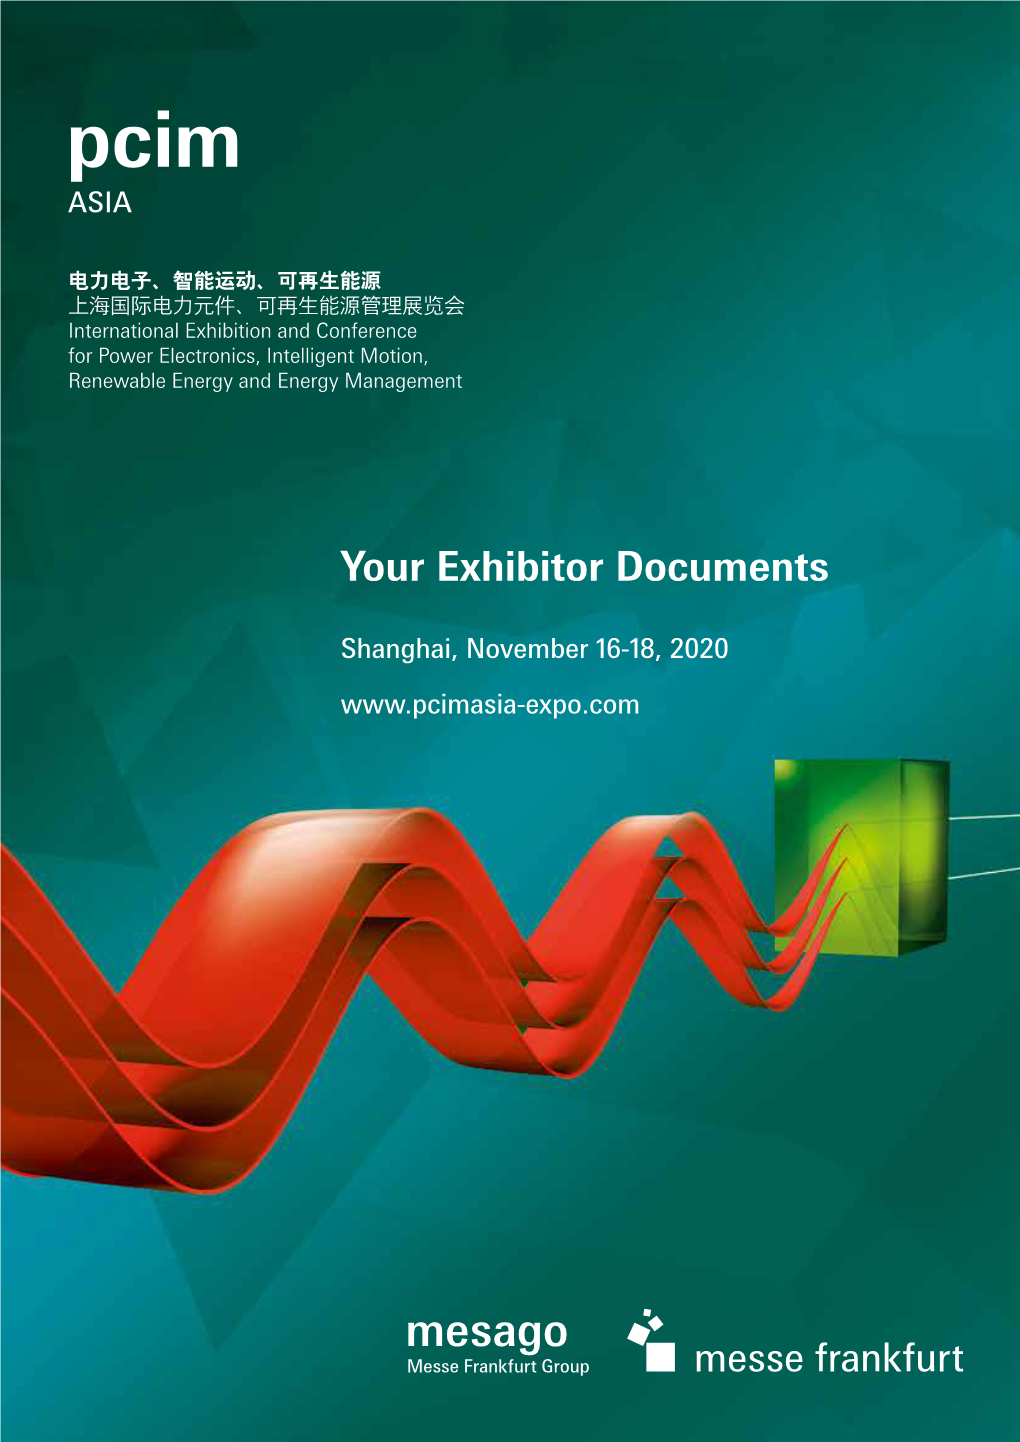 2020 Exhibitor Documents Download